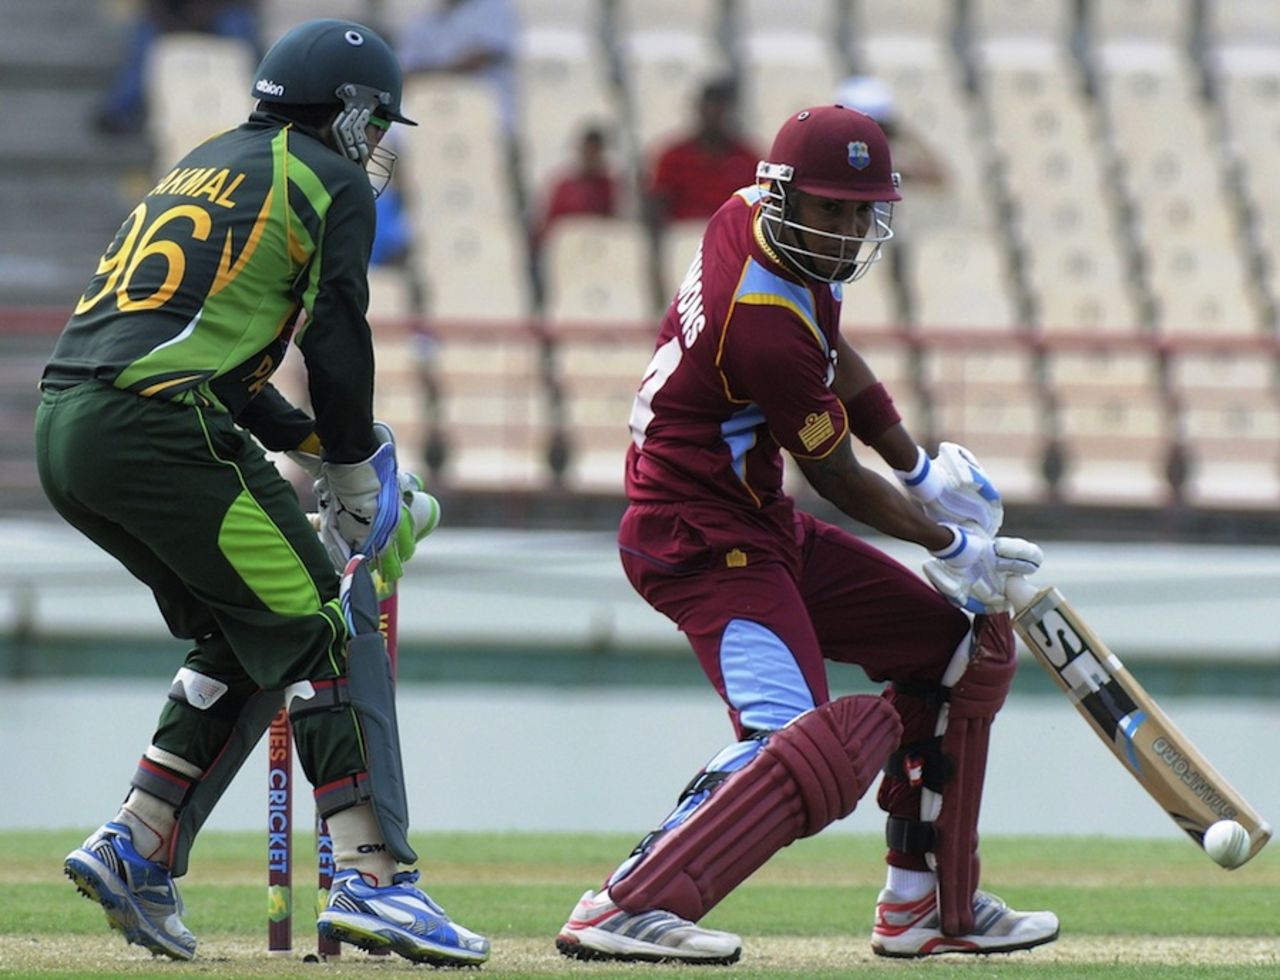 Lendl Simmons plays late cut, West Indies v Pakistan, 3rd ODI, St Lucia, July 19, 2013